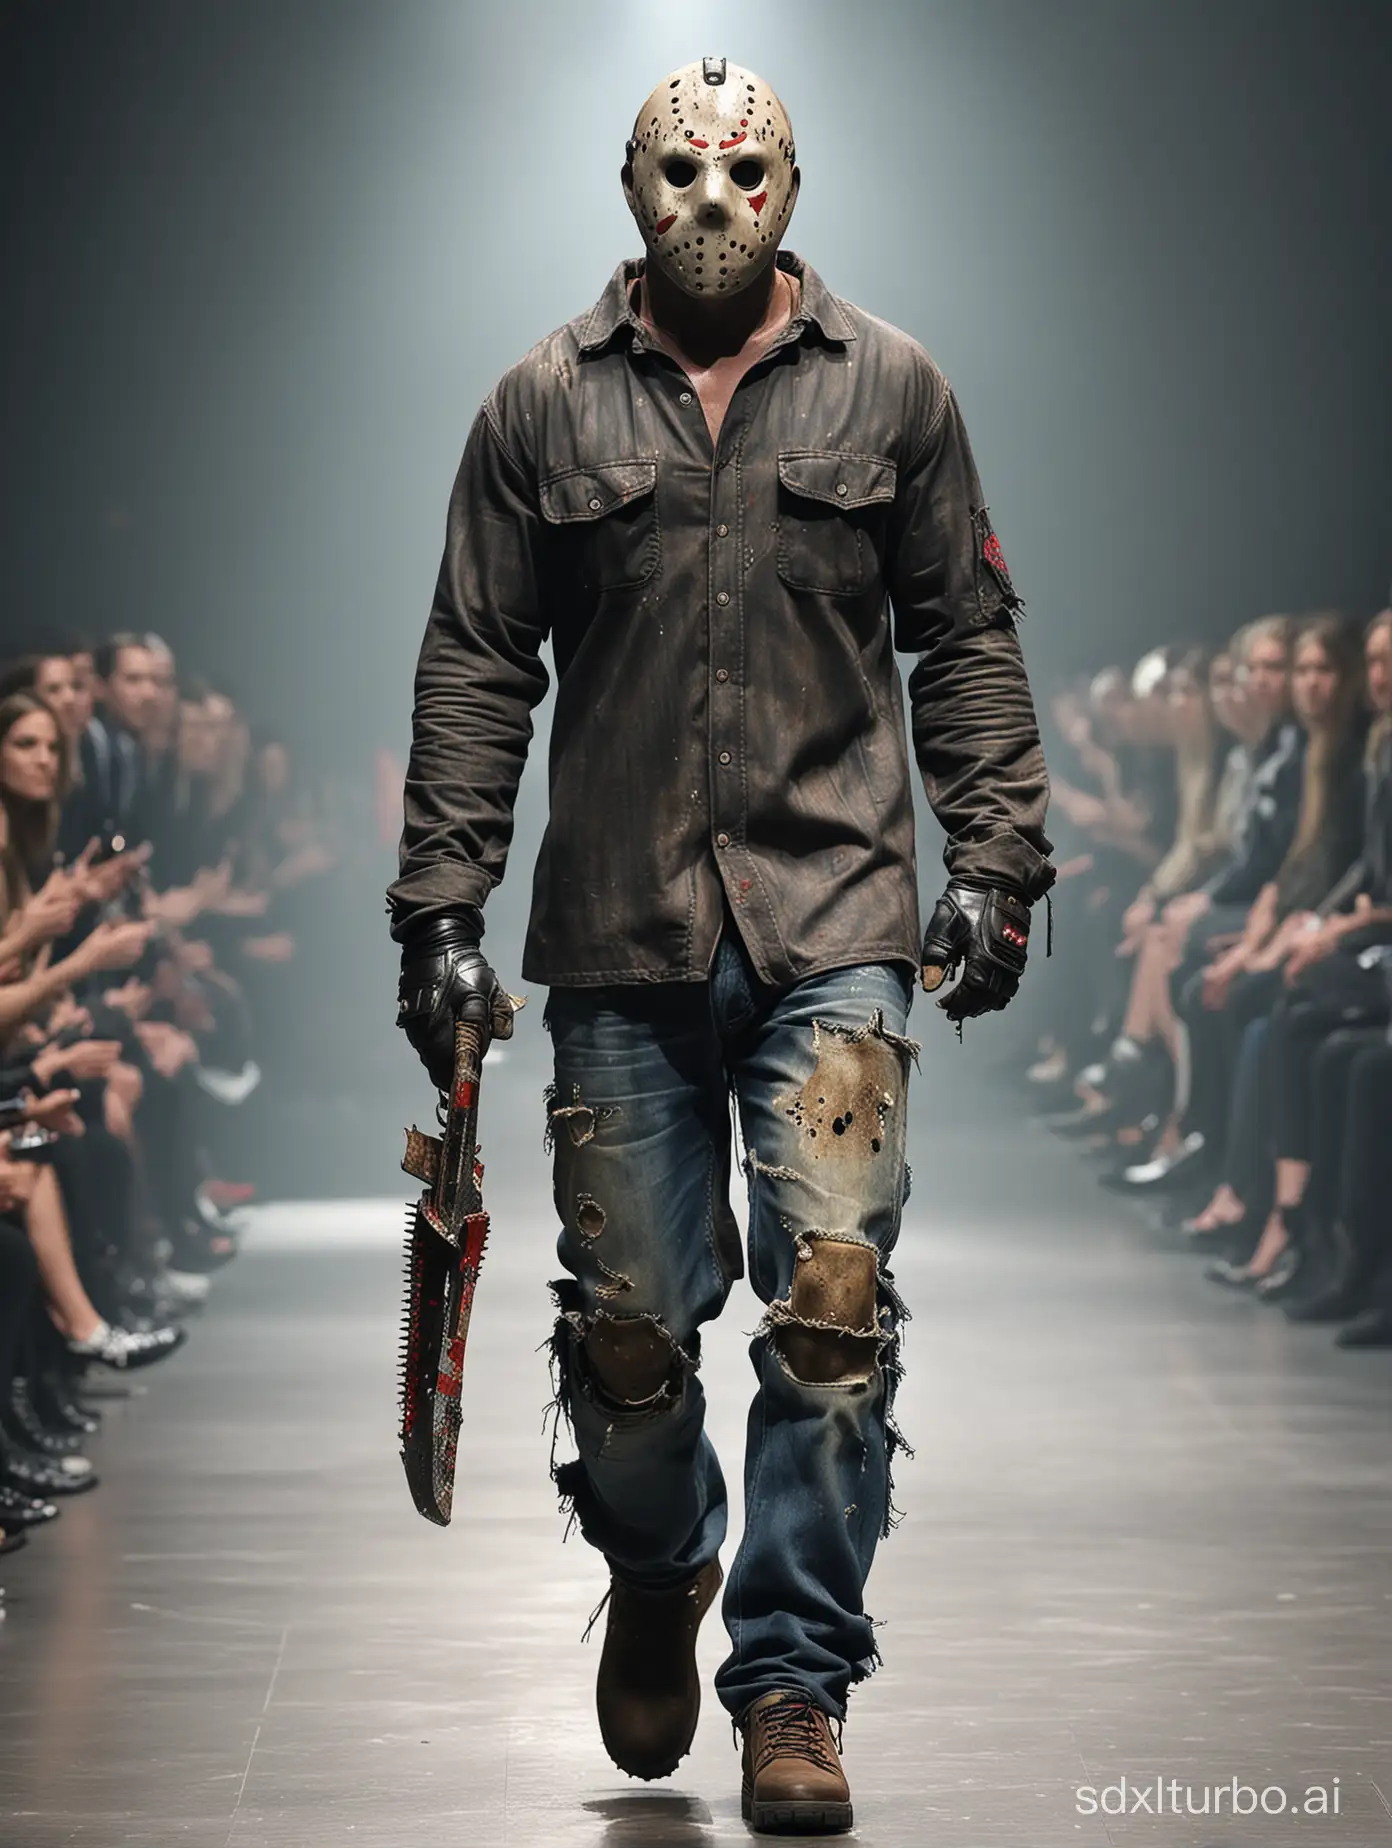 Jason-Voorhees-Rampages-Down-Paris-Fashion-Week-Runway-with-Chainsaw